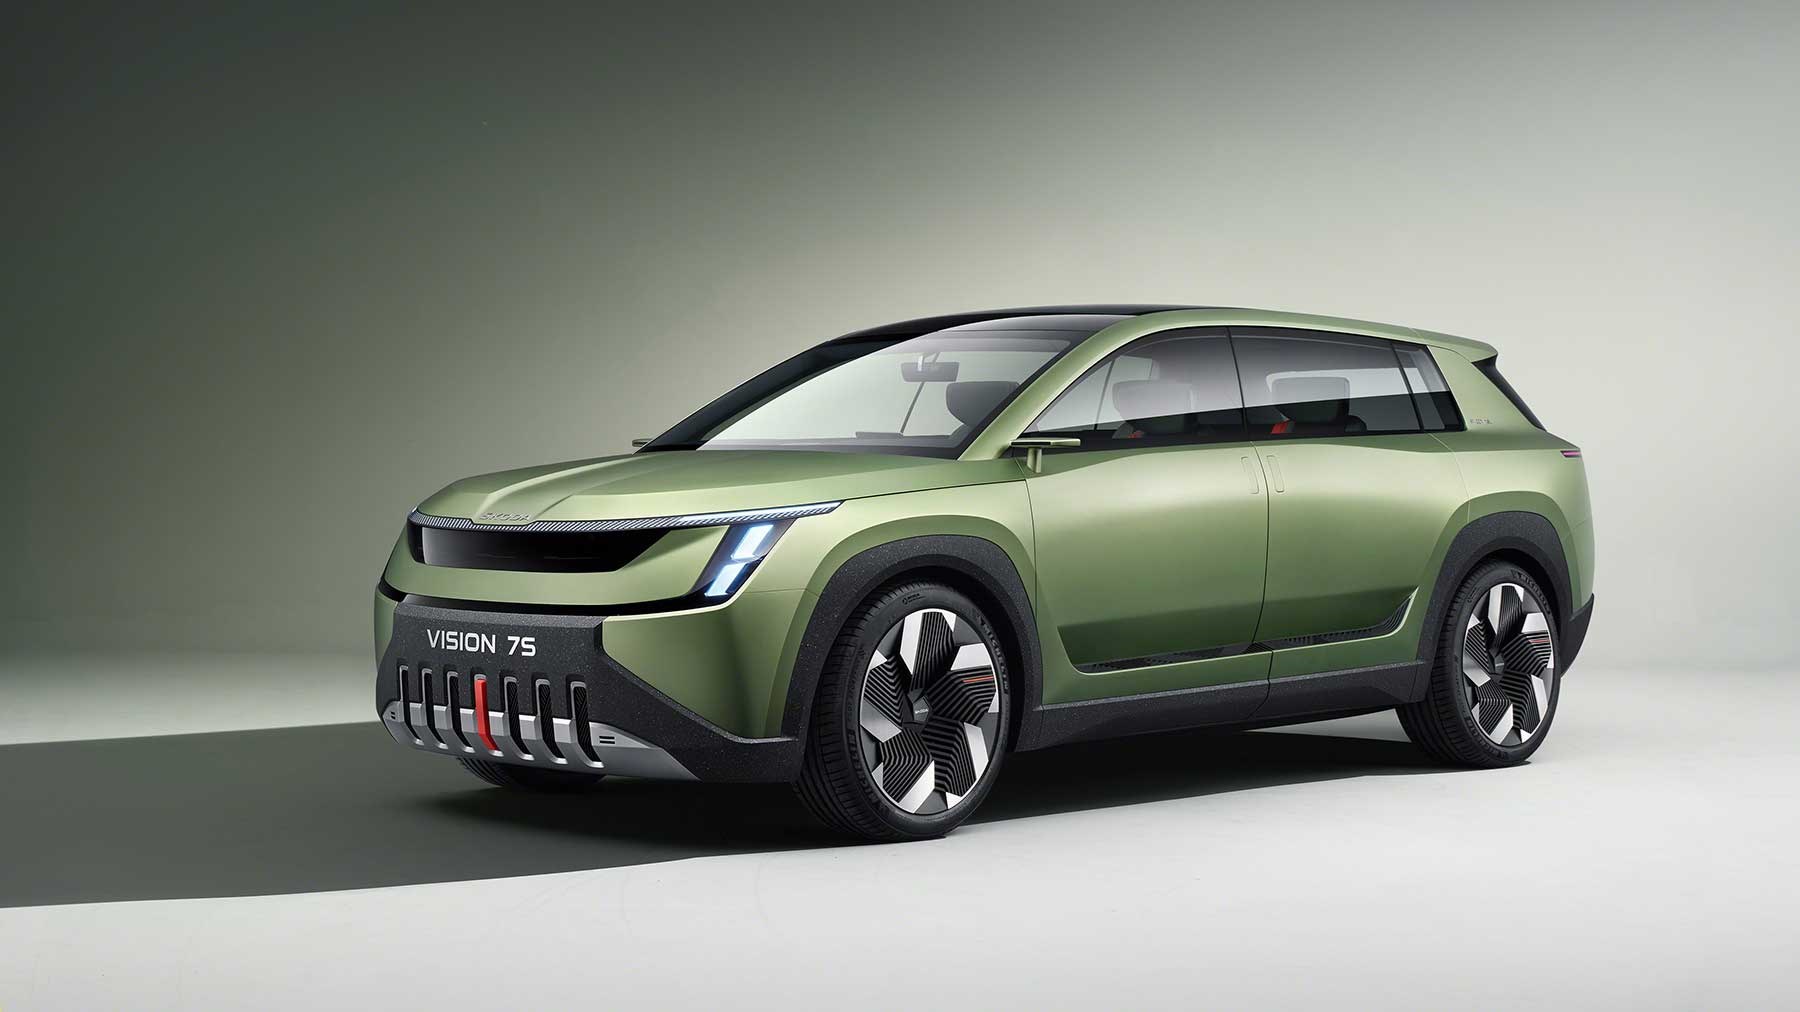 Skoda Vision 7S concept car unveiled: the Czechs' new face